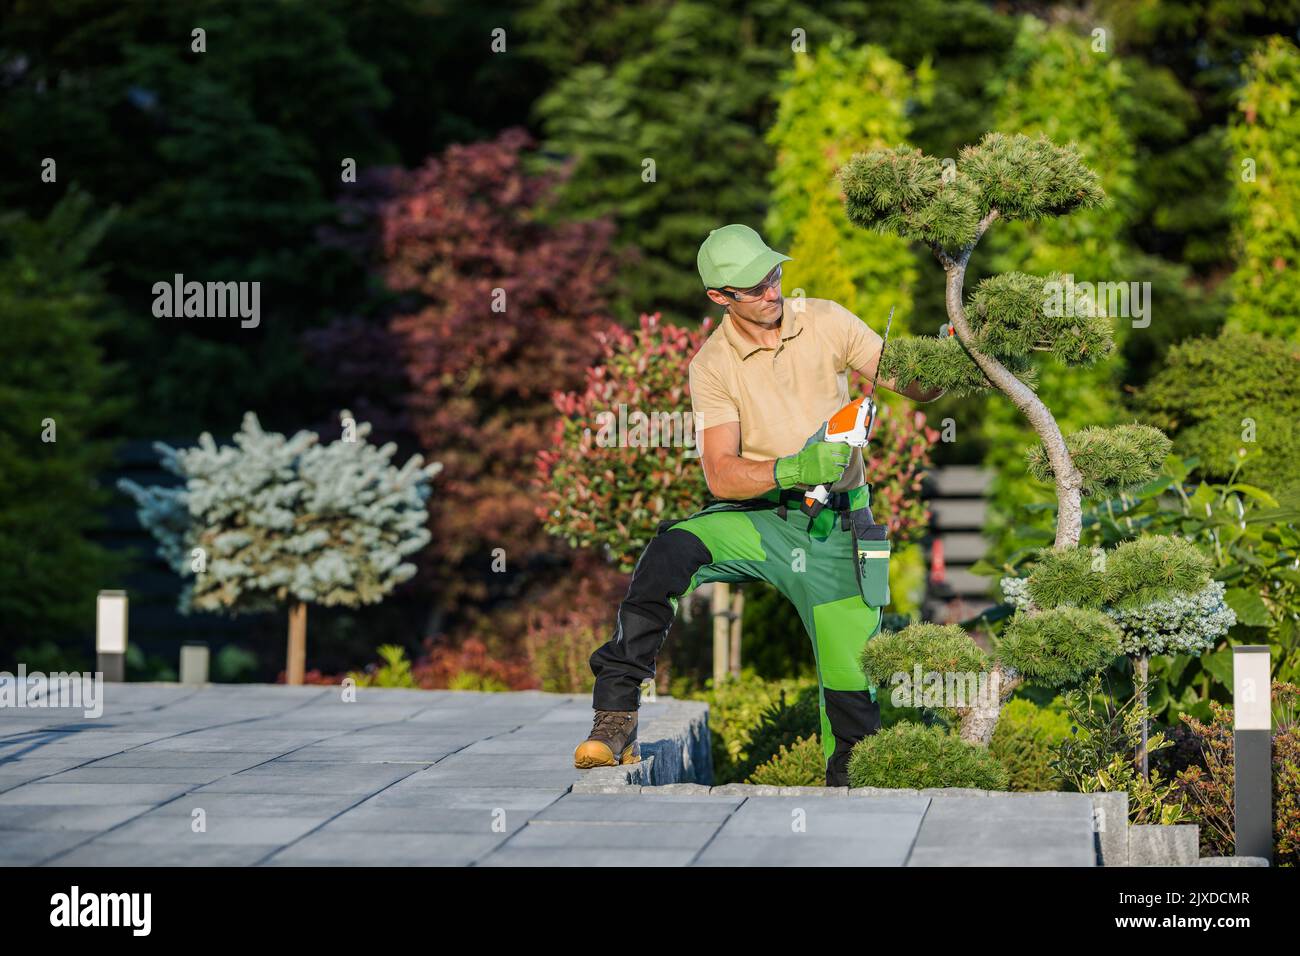 Caucasian Landscape Gardener Shaping Garden Ornamental Tree Using Hand Held Hedge Trimmer. Gardening and Landscaping Professional Tools and Equipment Stock Photo